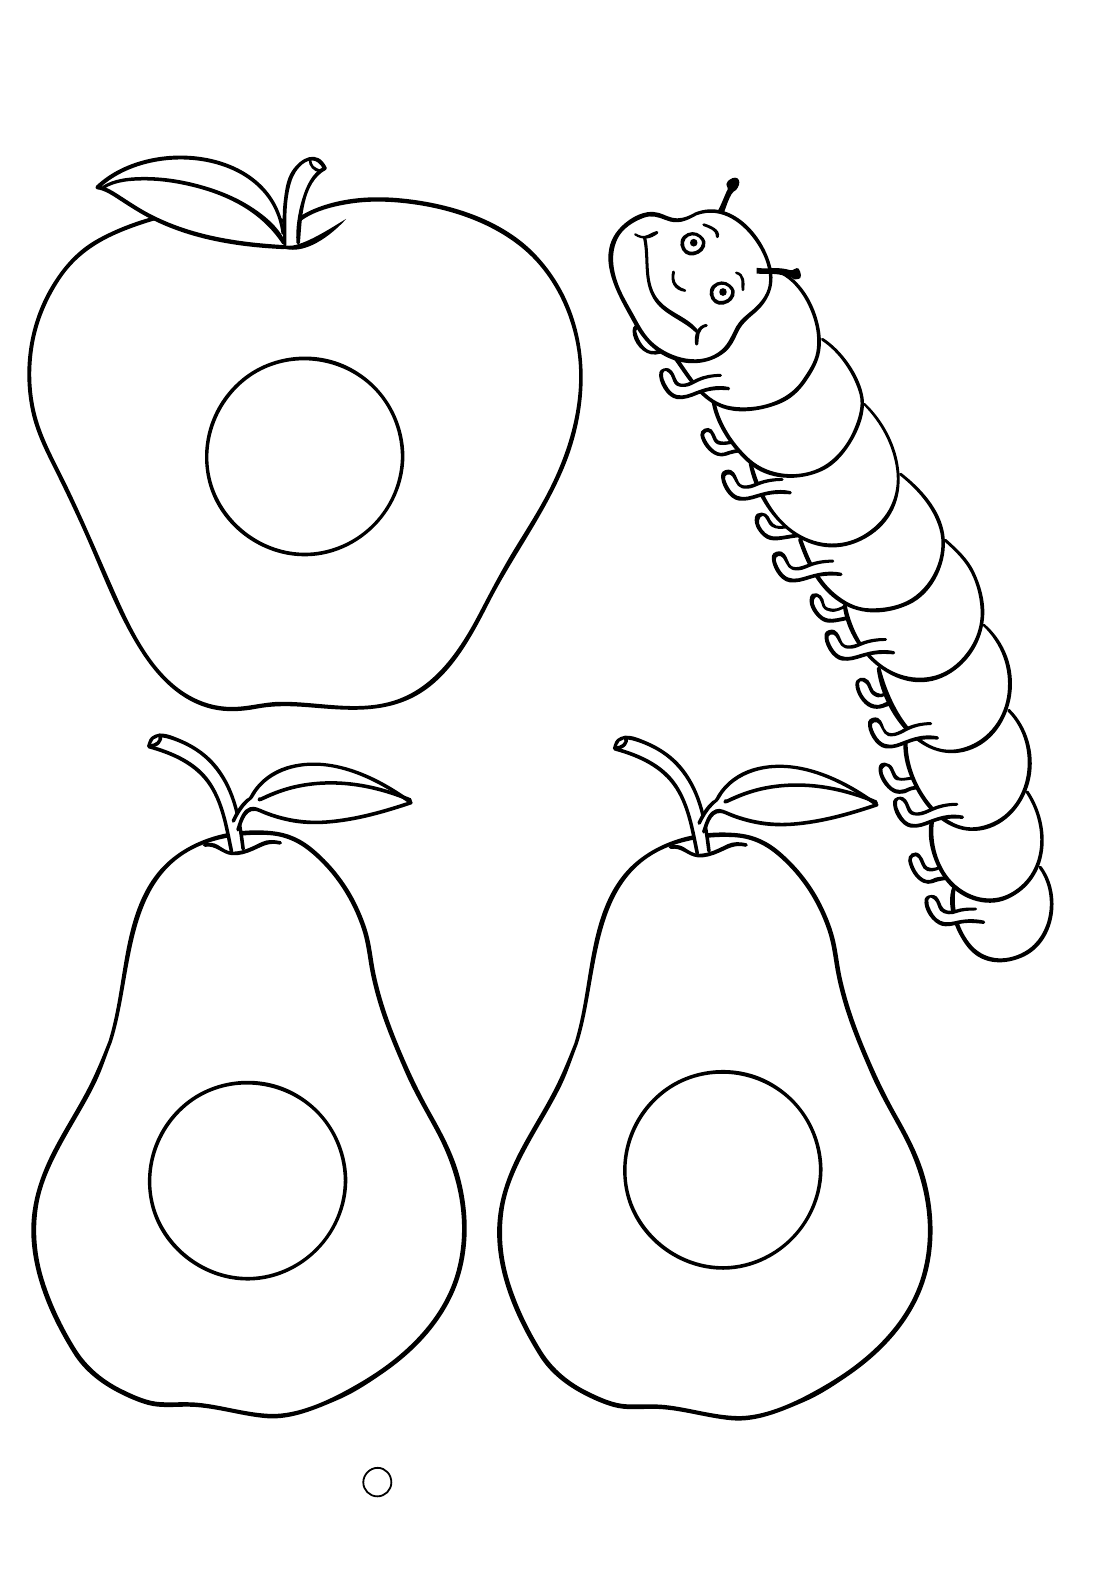 Very hungry caterpillar coloring pages to download and